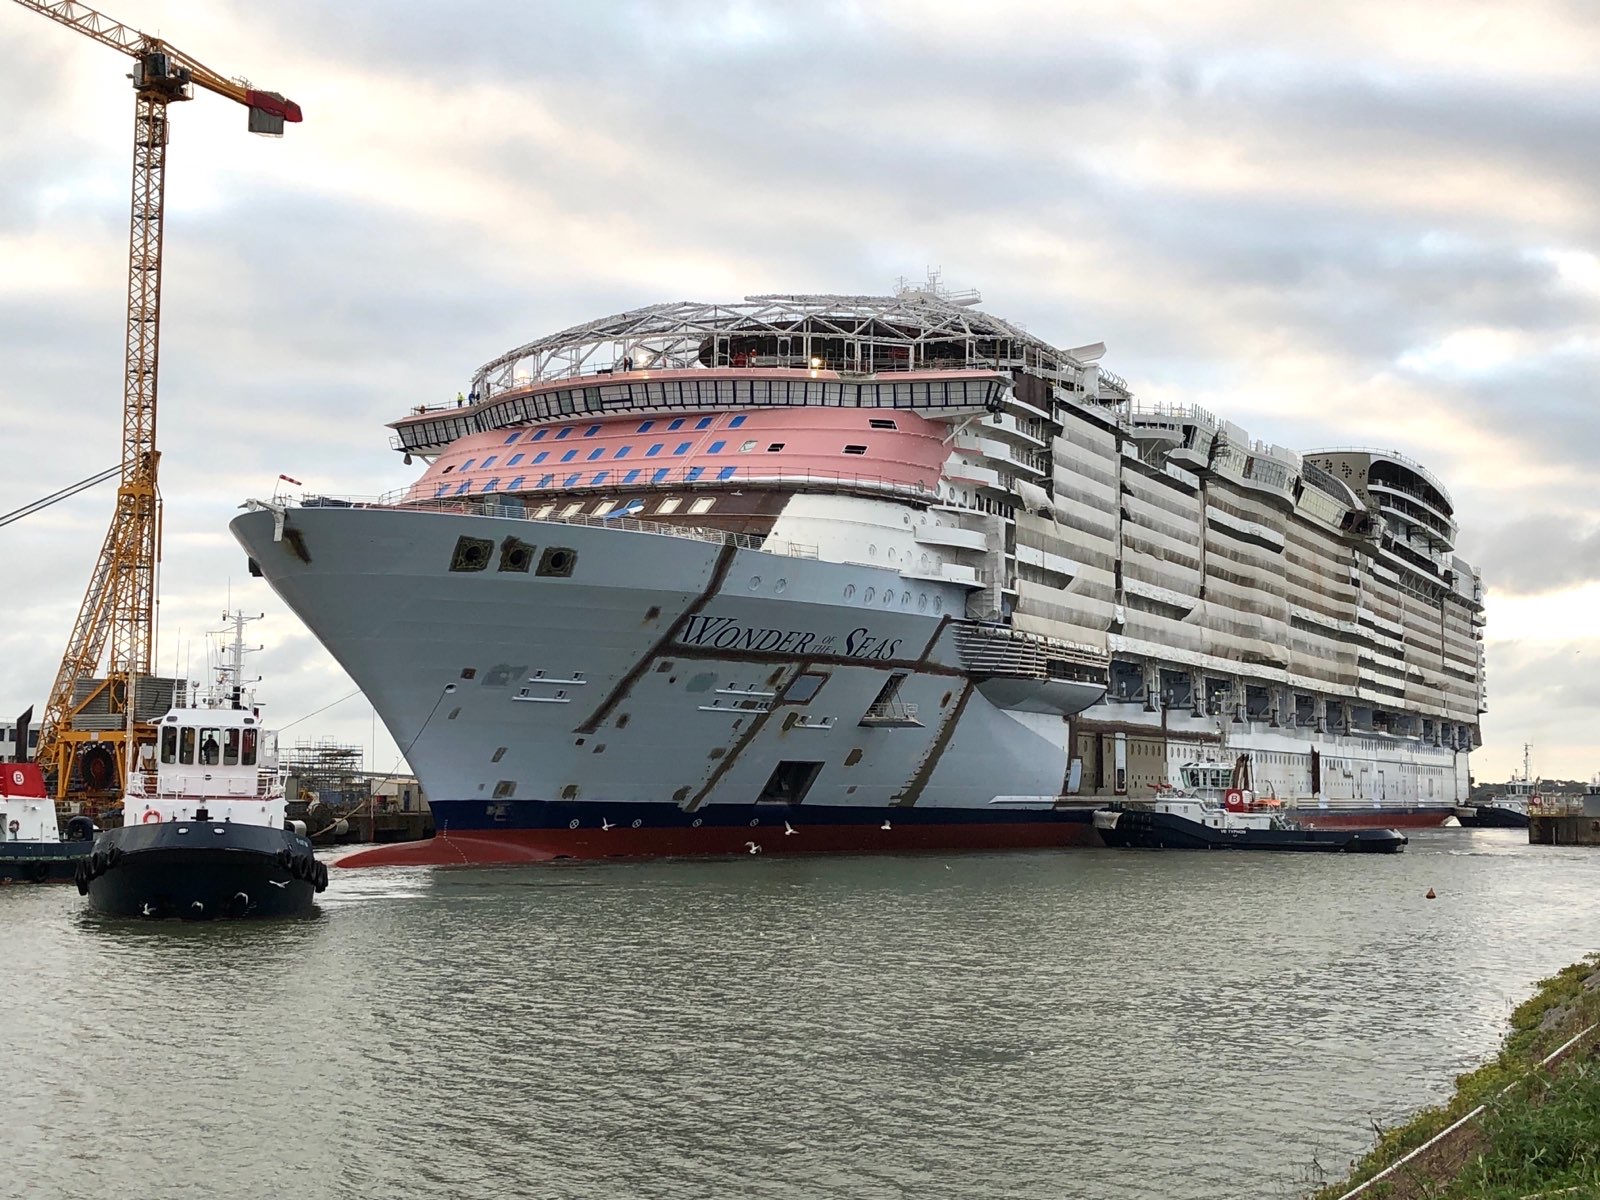 Wonder of the Seas Floated Out Of Shipyard | Cruise Capital